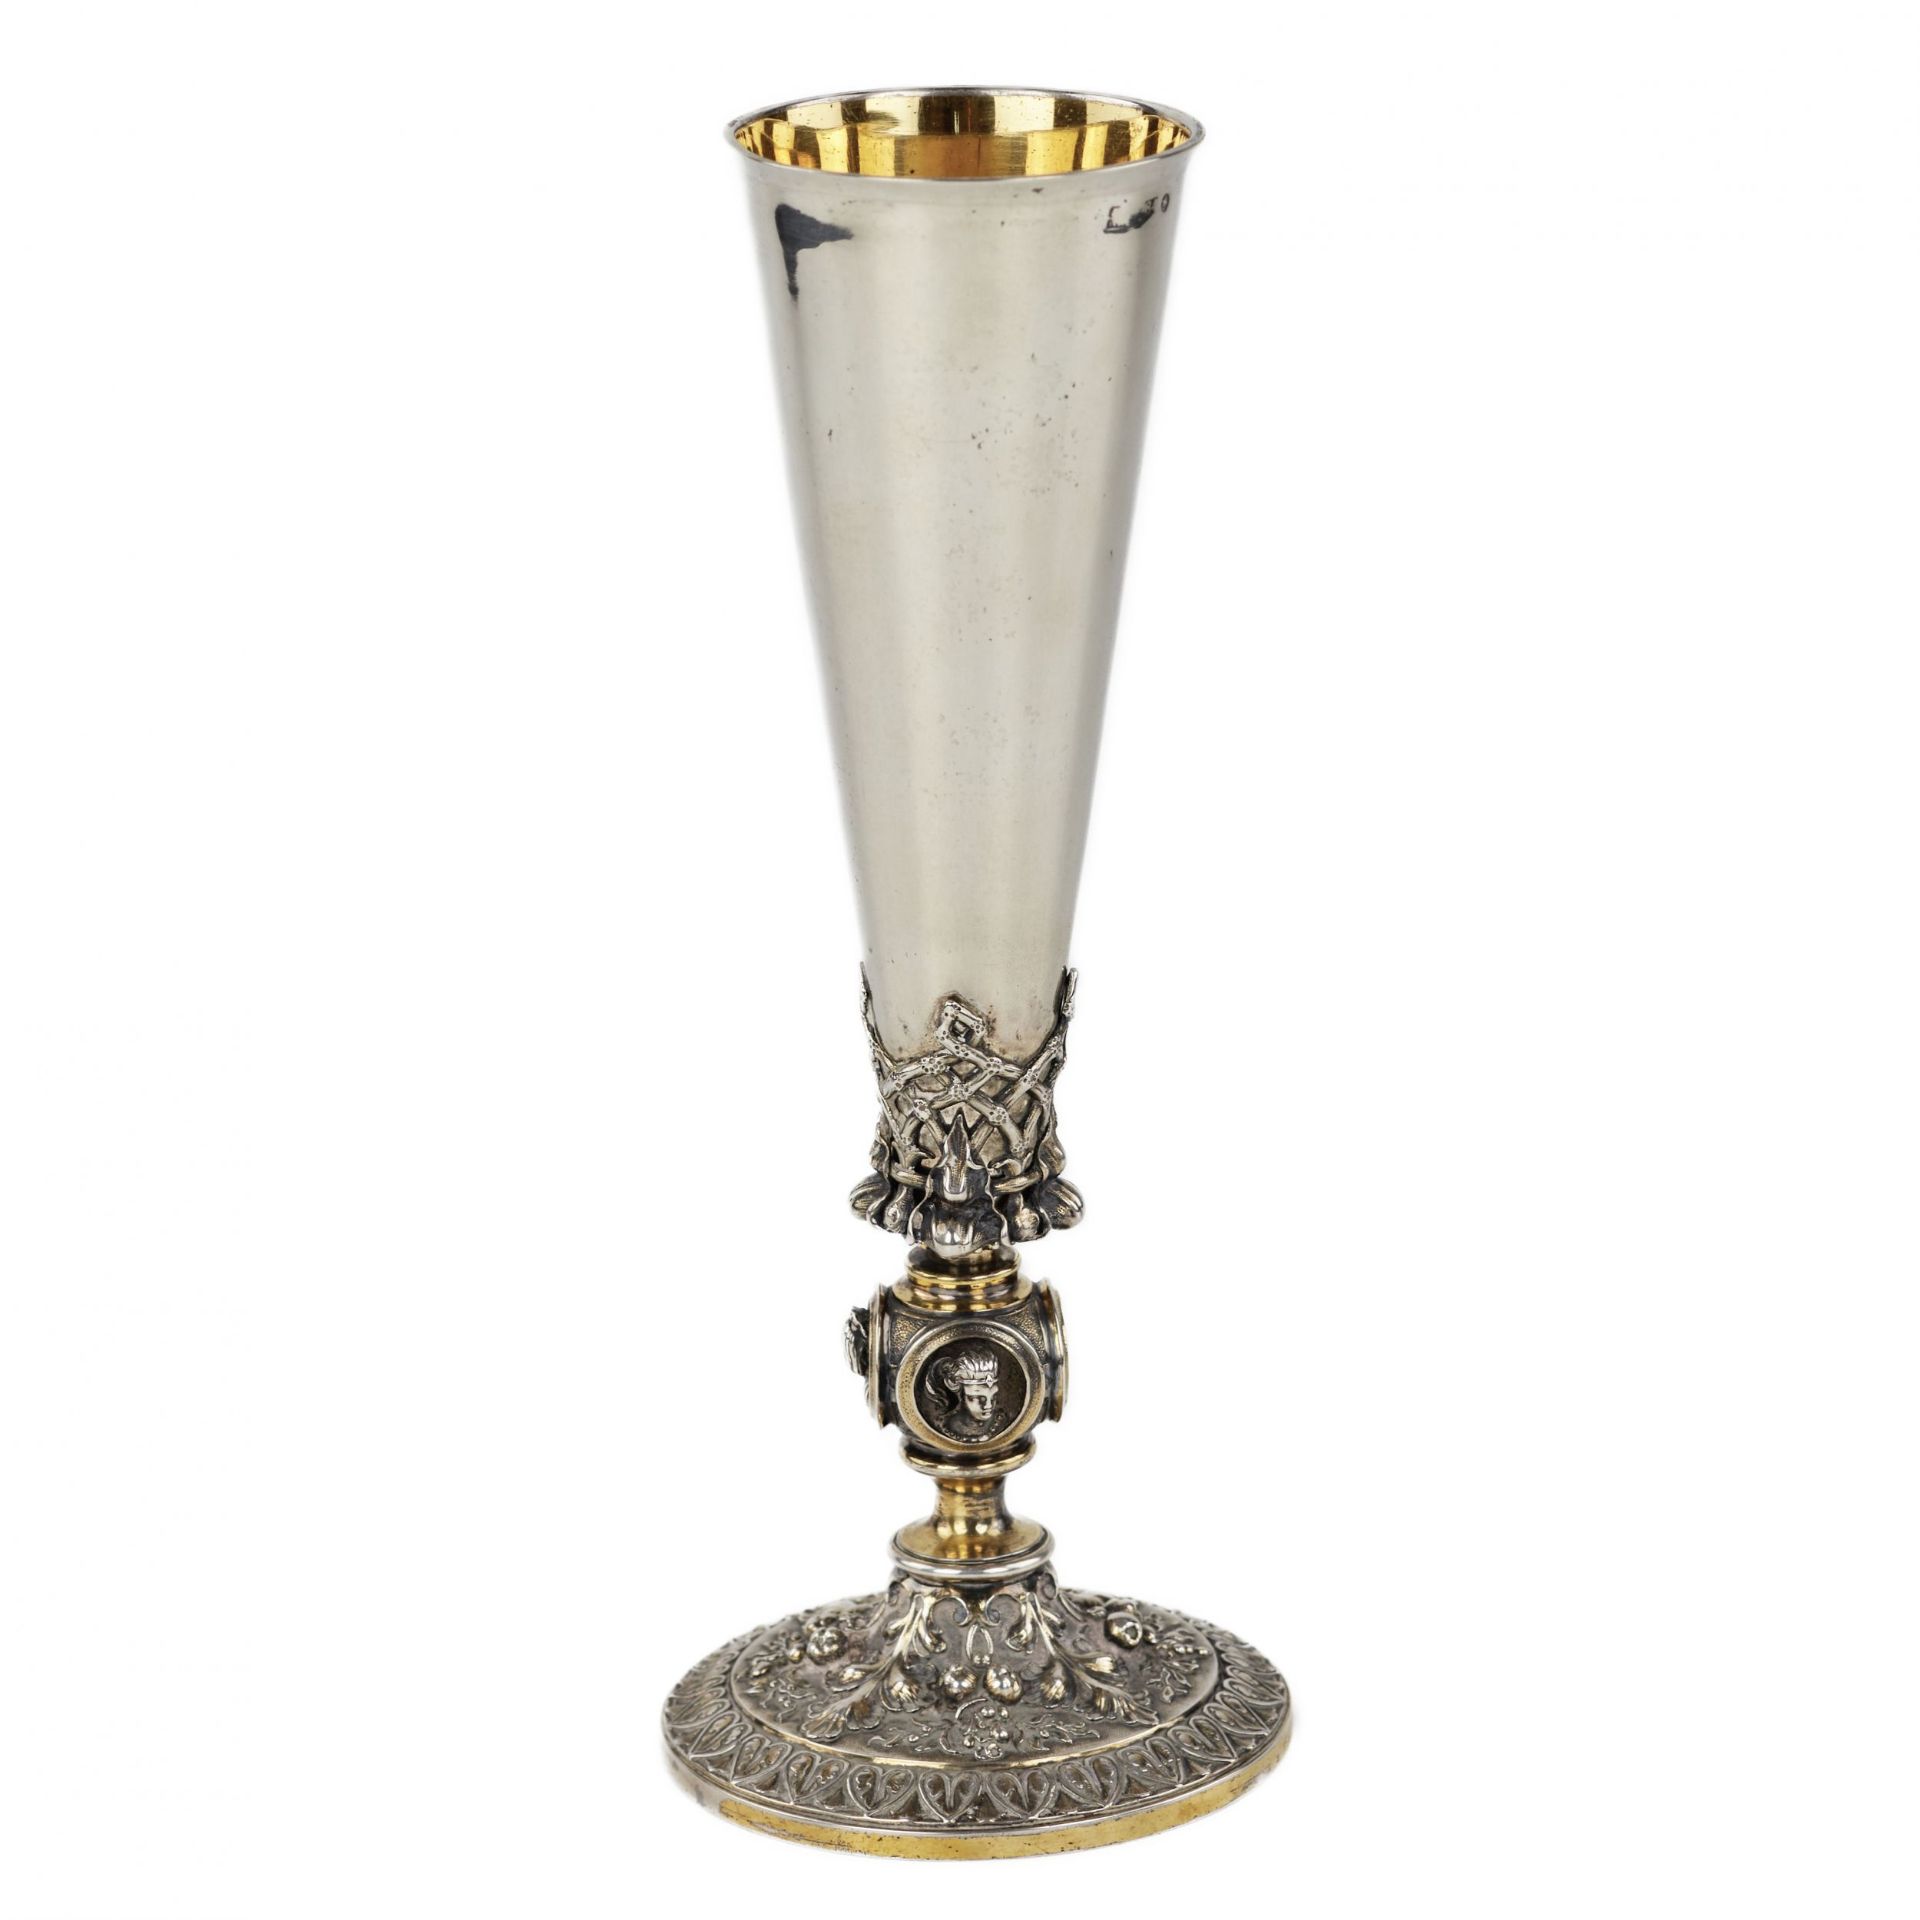 Gilded silver goblet. St. Petersburg, 84 samples, late 19th century. - Image 4 of 10